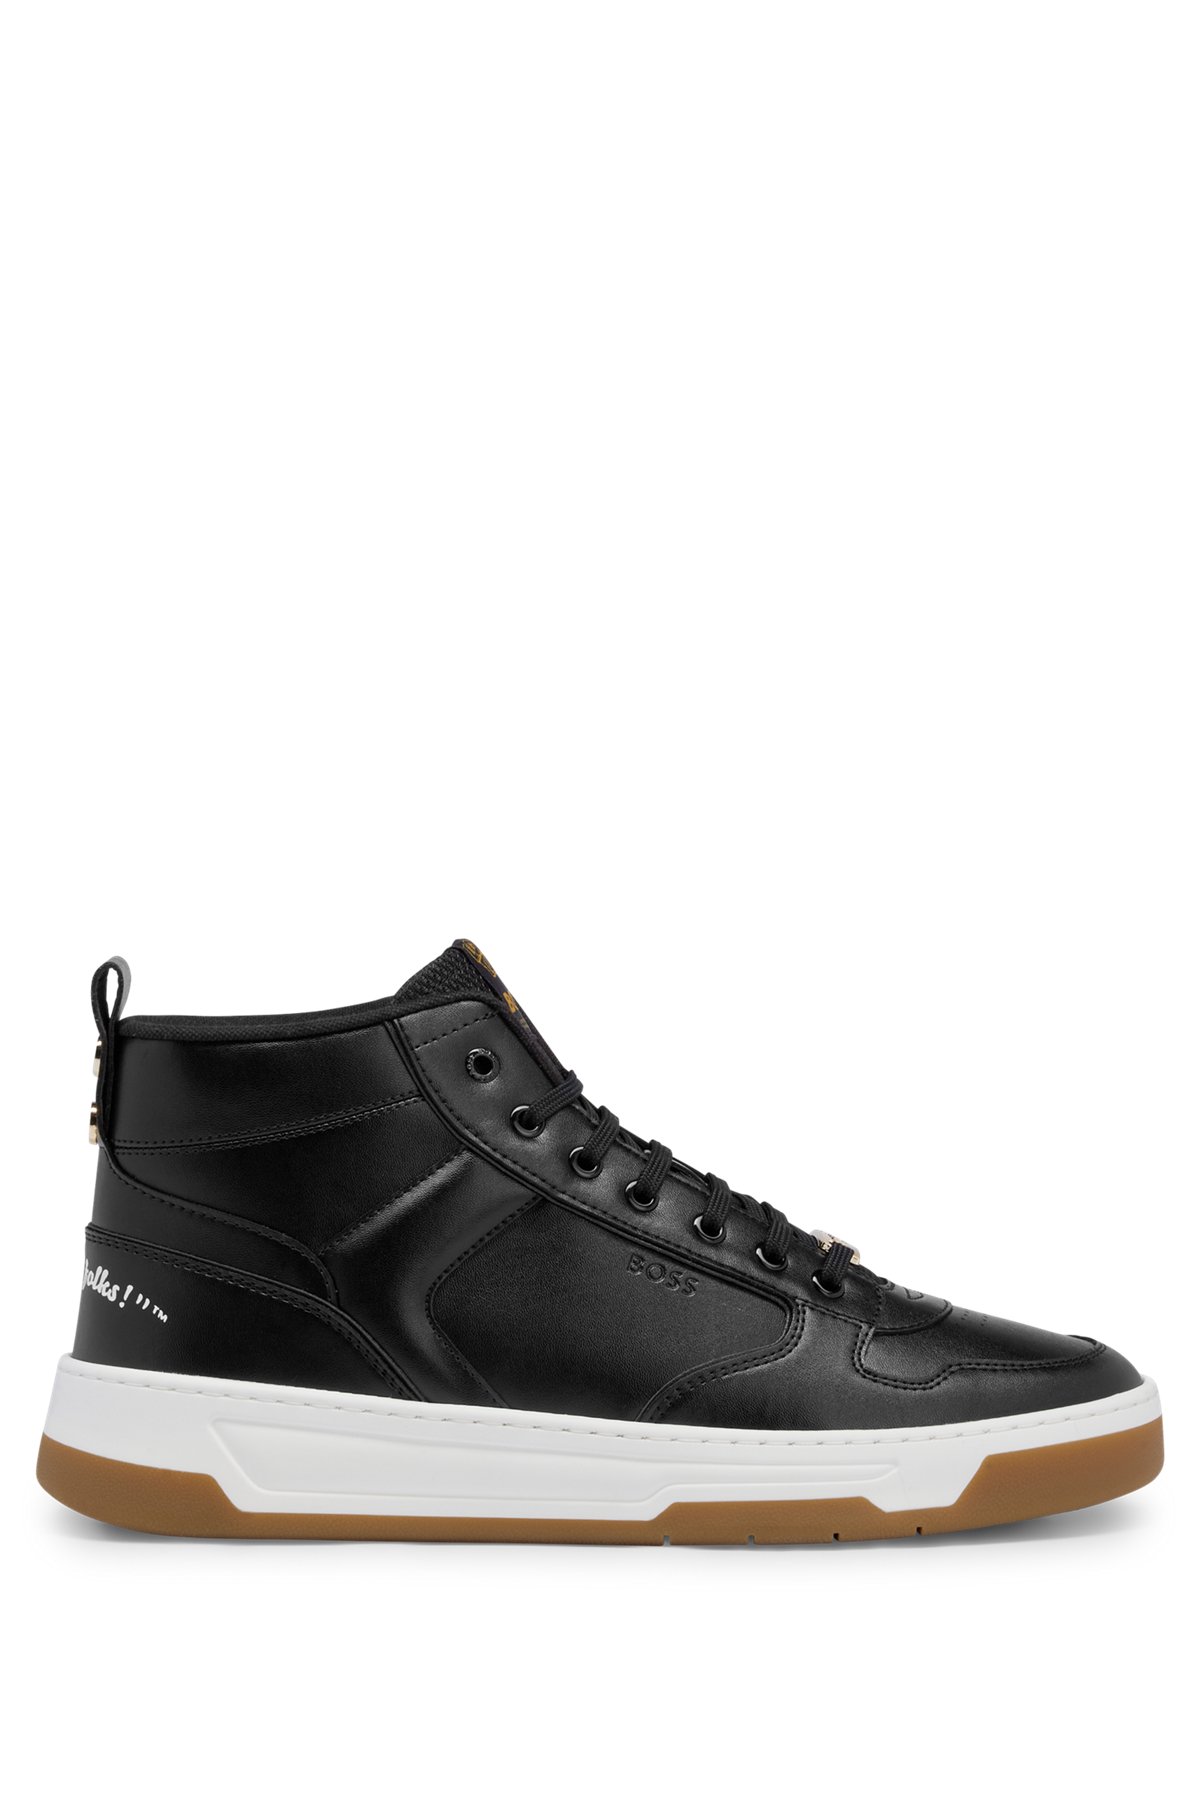 Looney Tunes x BOSS High-top trainers with slogan detailing and logo, Black